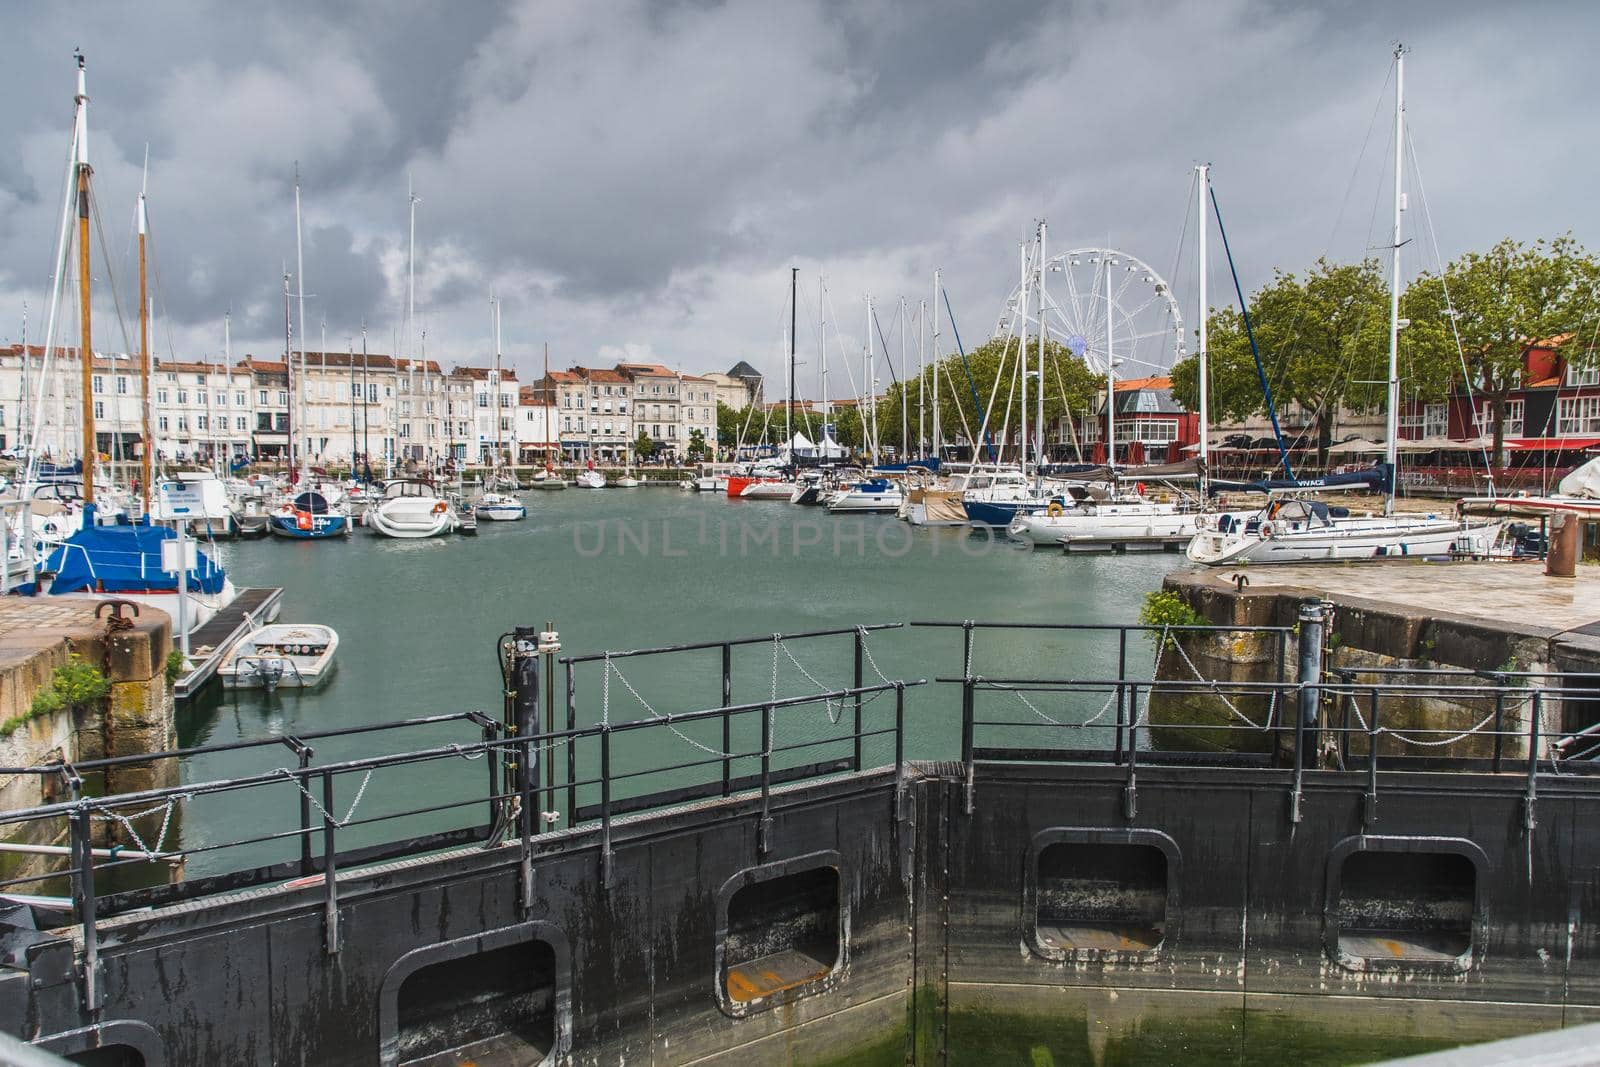 Old port of La Rochelle by raphtong